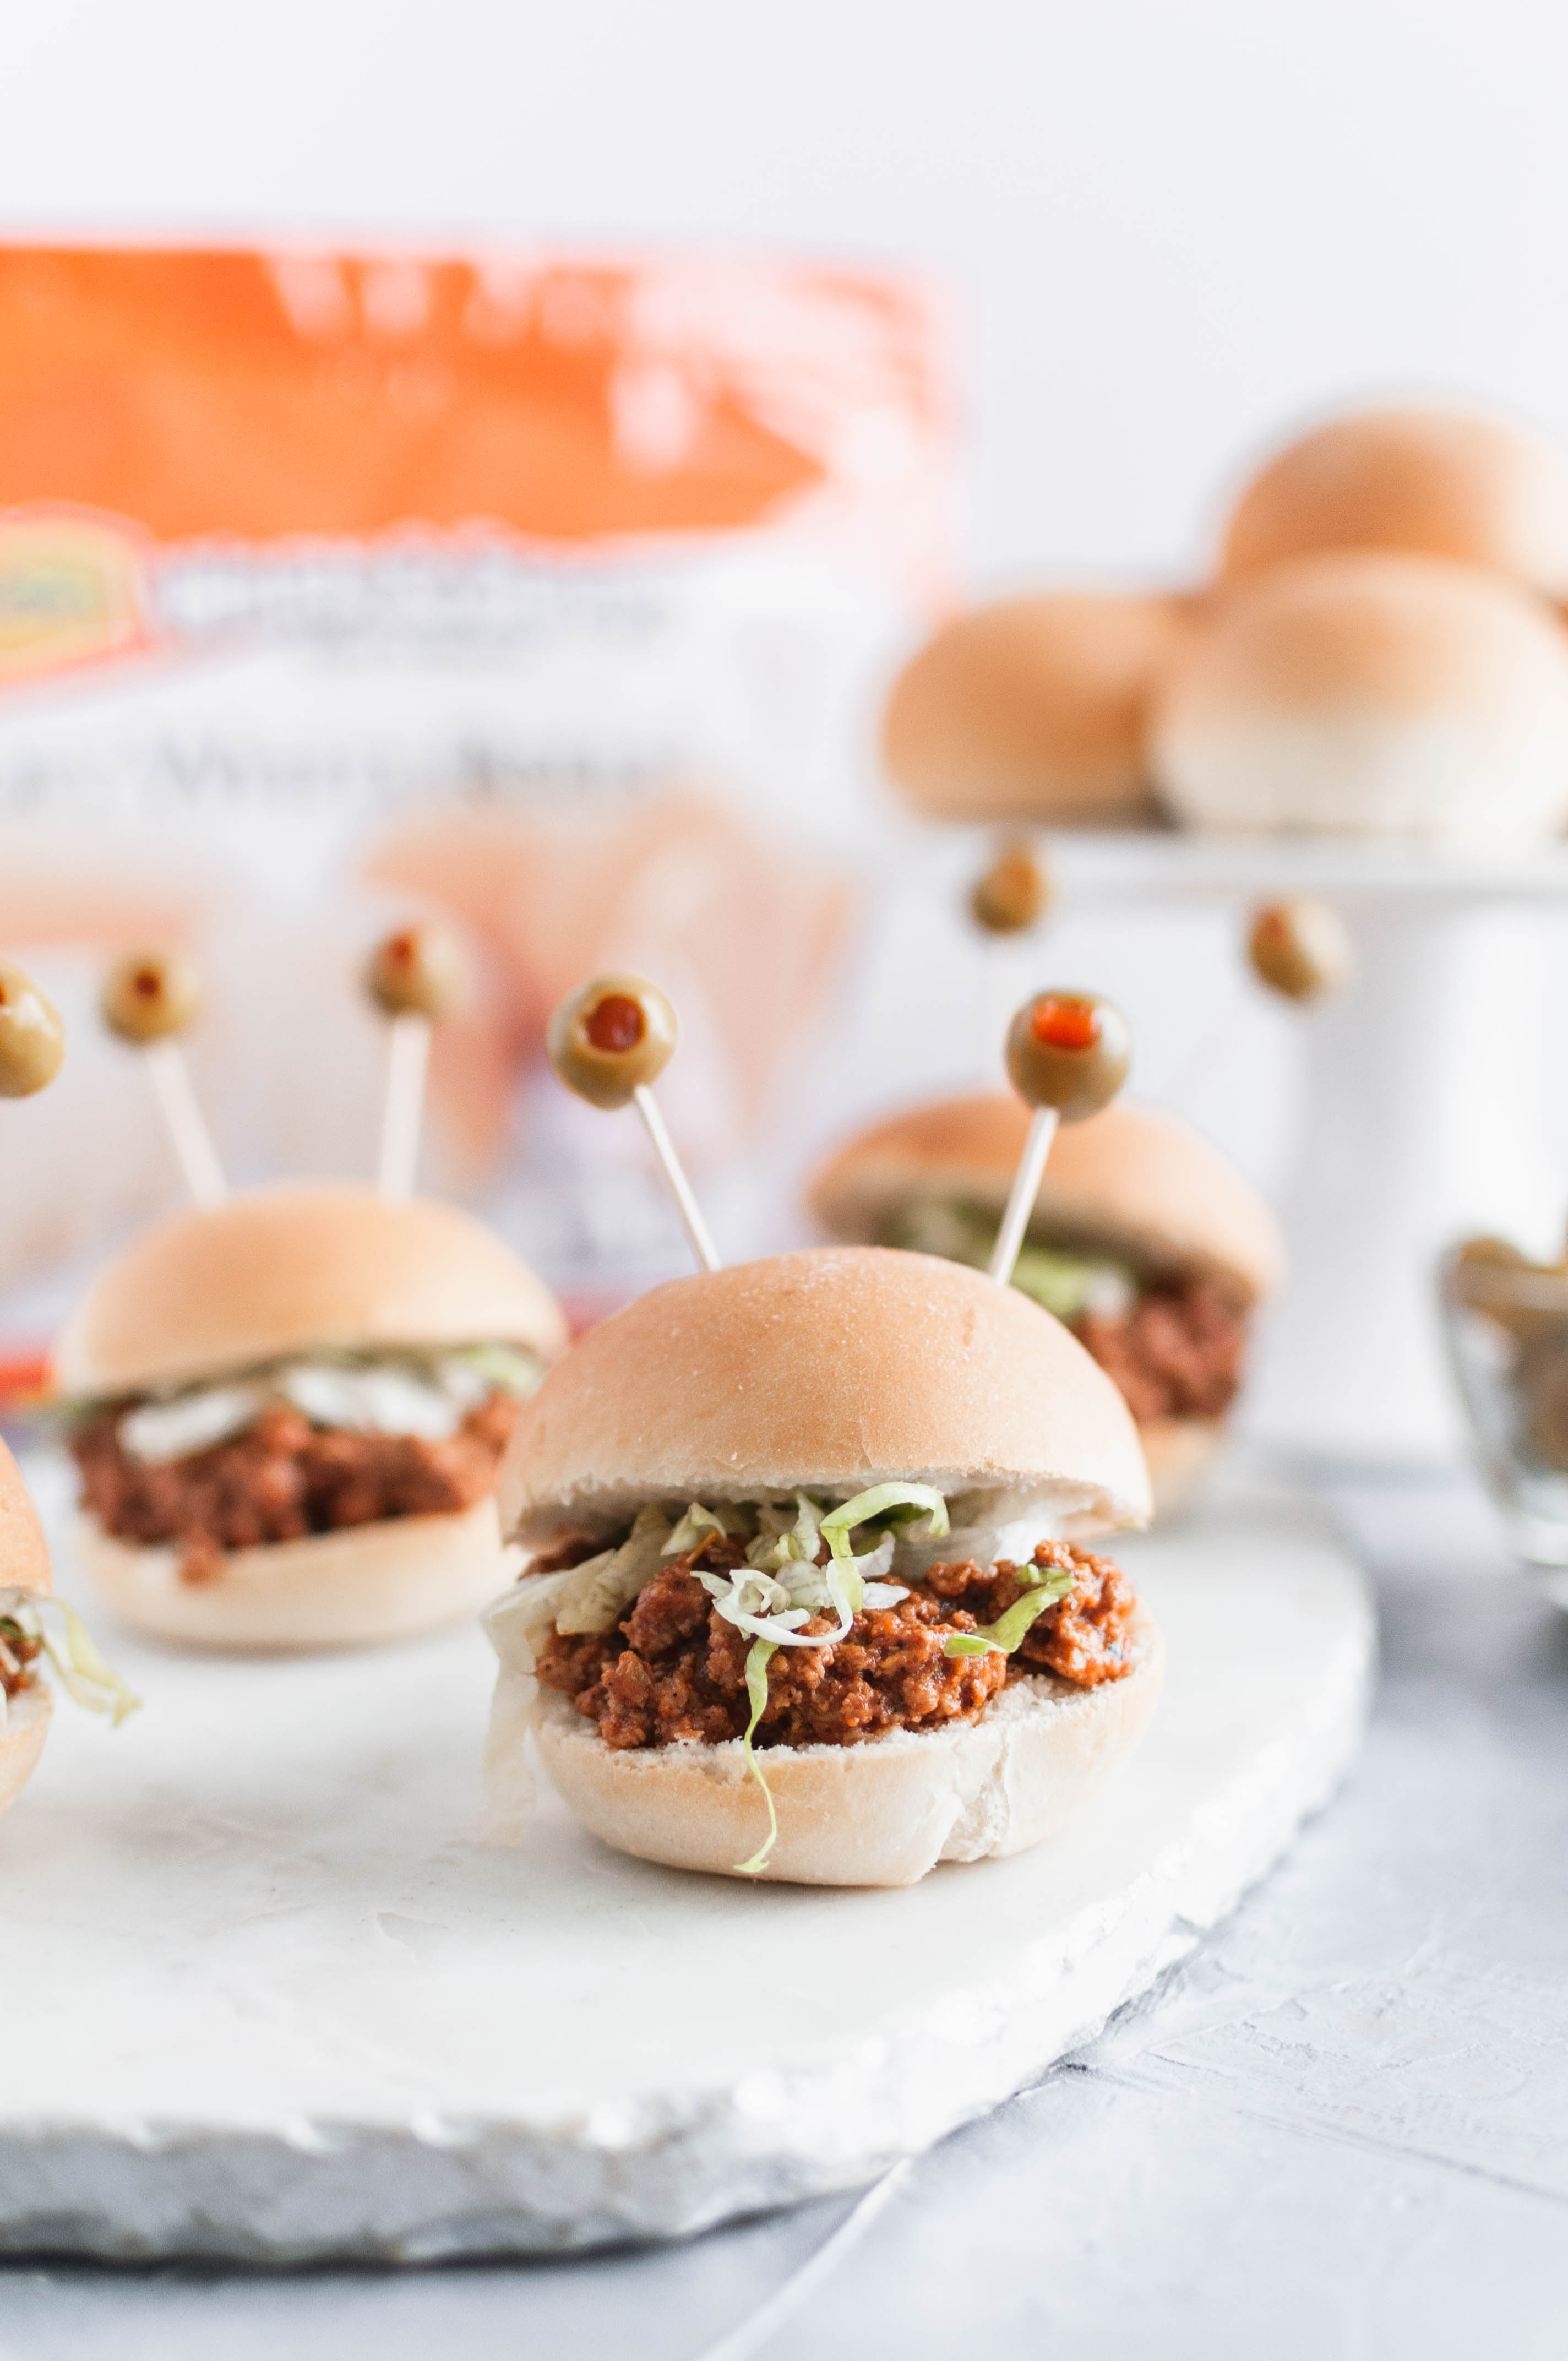 Celebrate Halloween with Rhodes and these spooky Halloween Sliders. Pimento stuffed olives make creepy monster eyes atop these taco sliders.